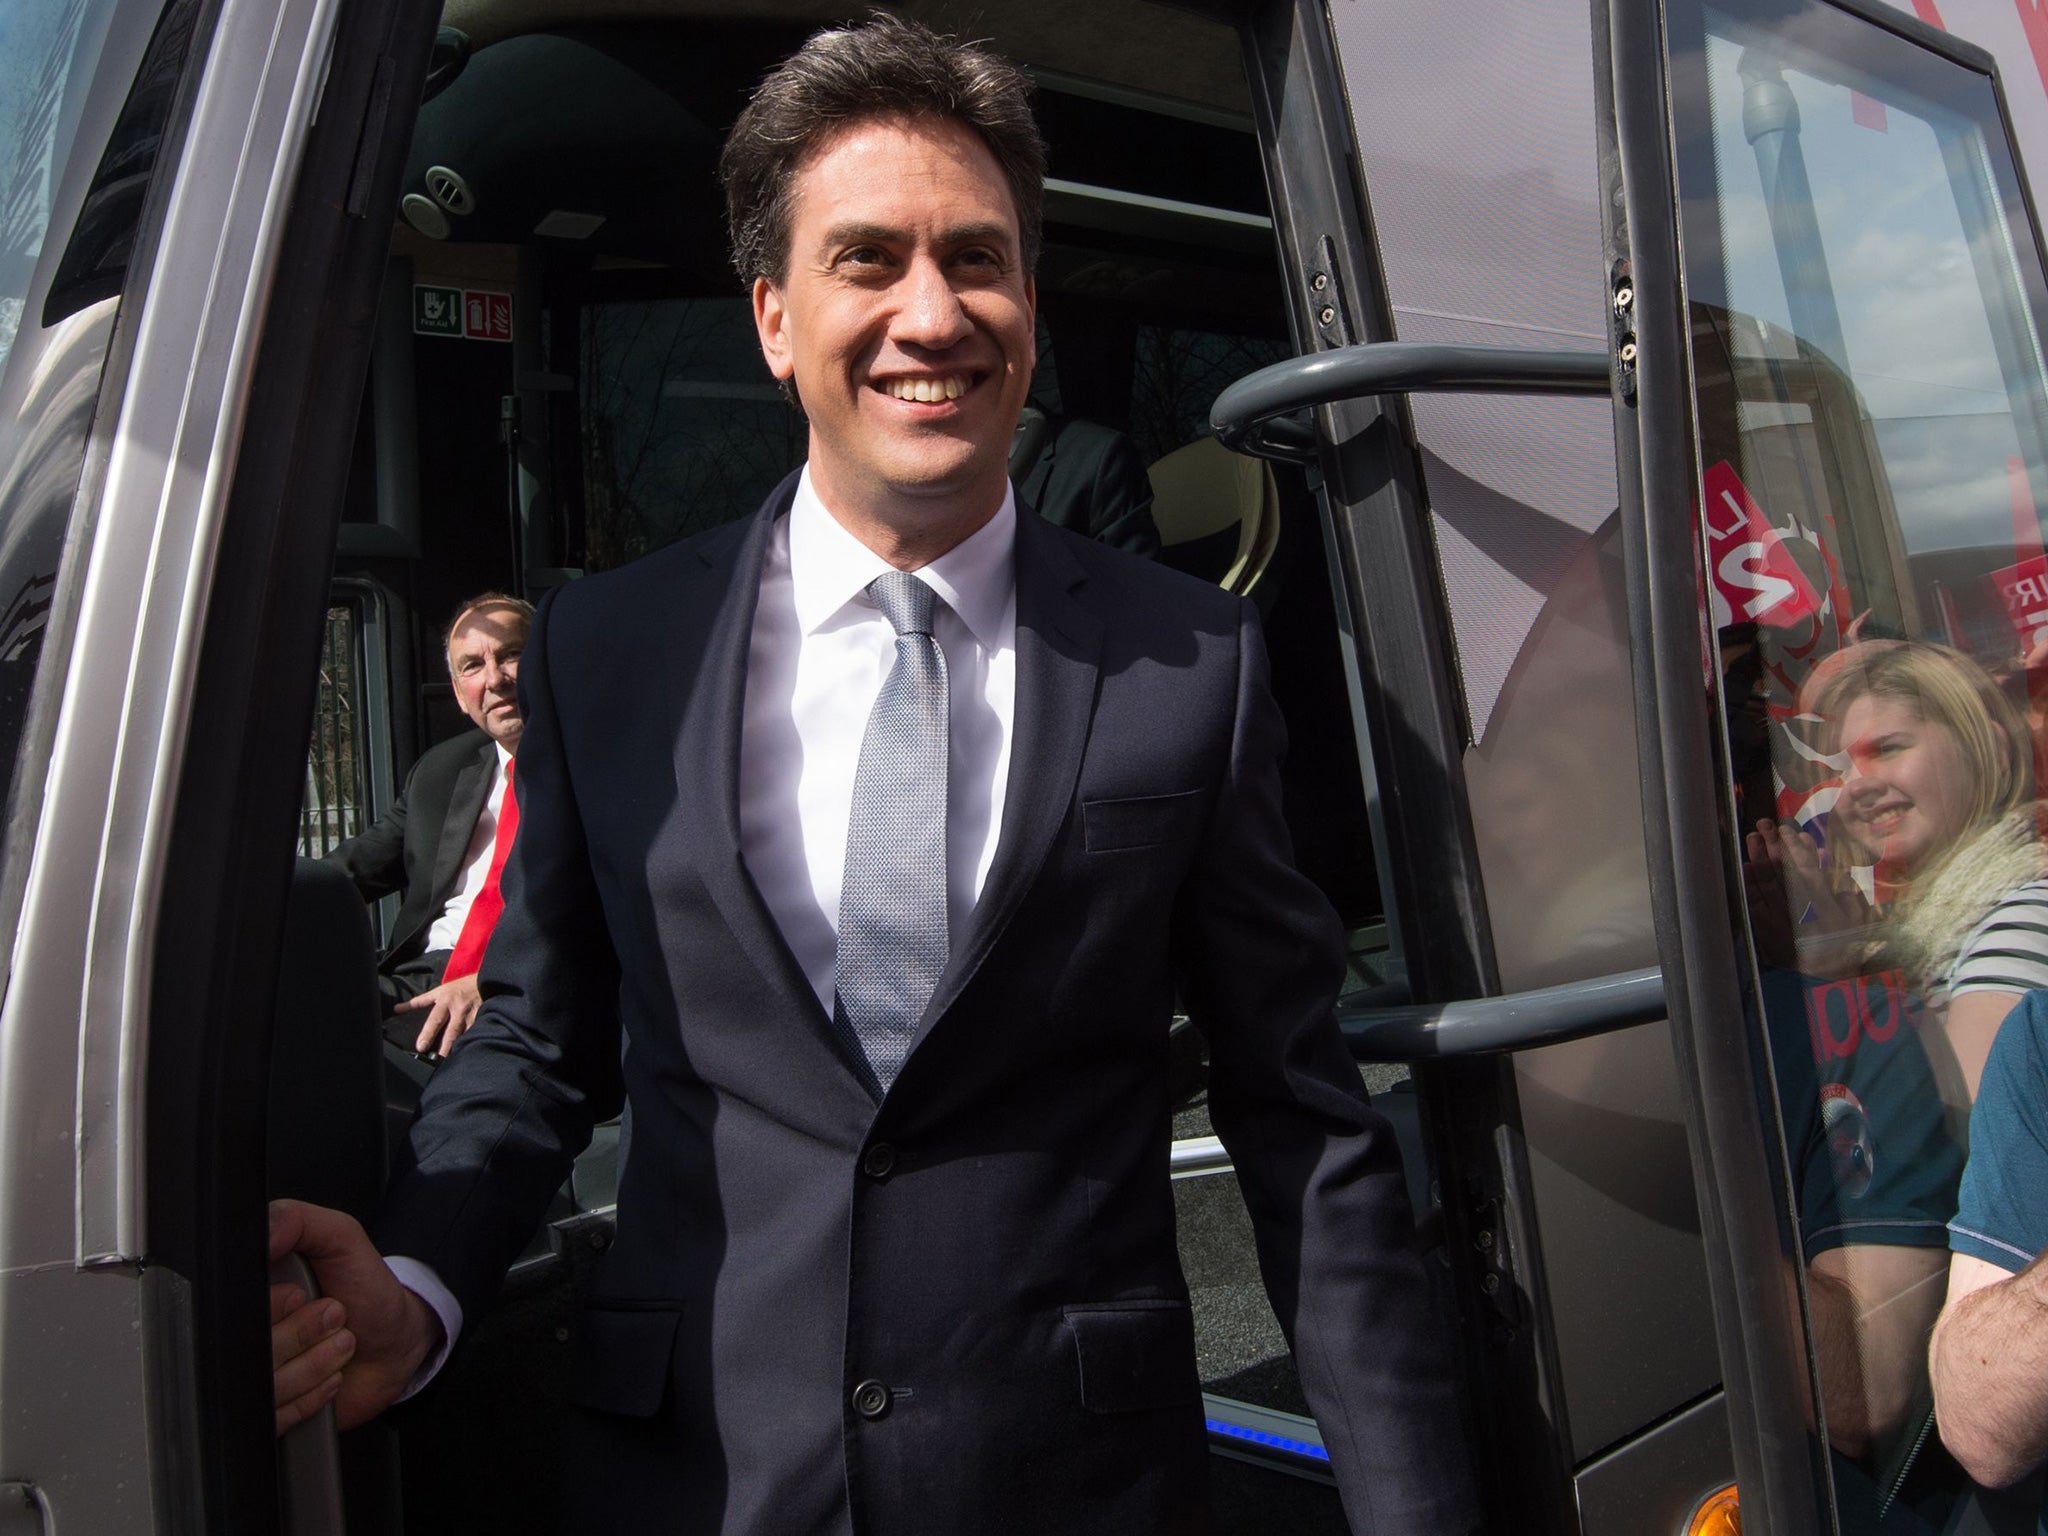 Ed Miliband gets smiley on the campaign trail